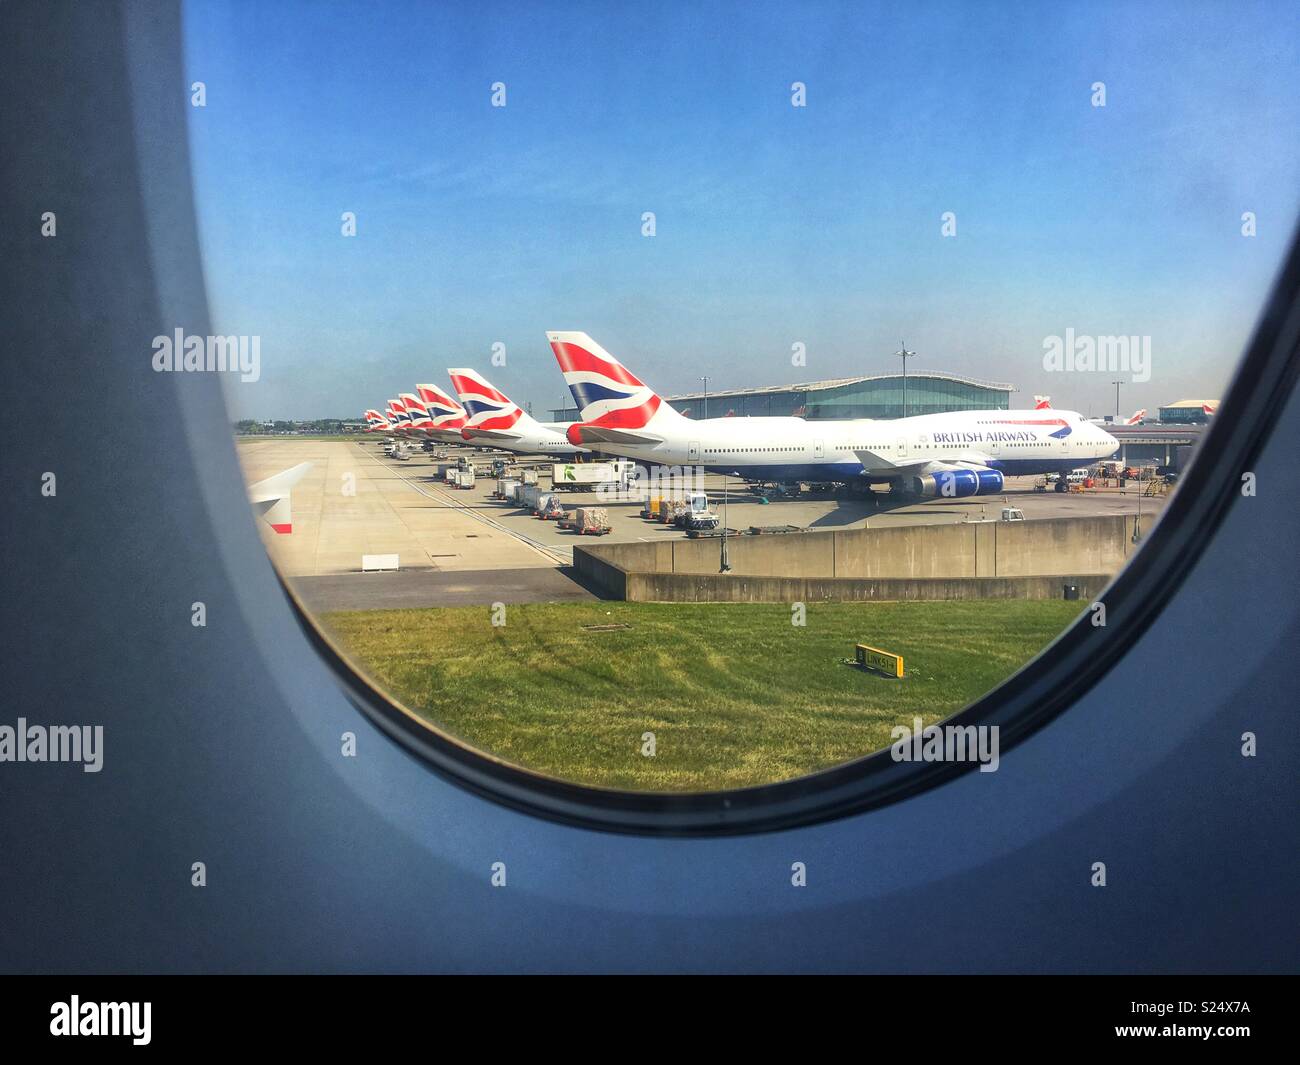 A row of British Airways airplanes at Heathrow Airport, London, England UK Stock Photo